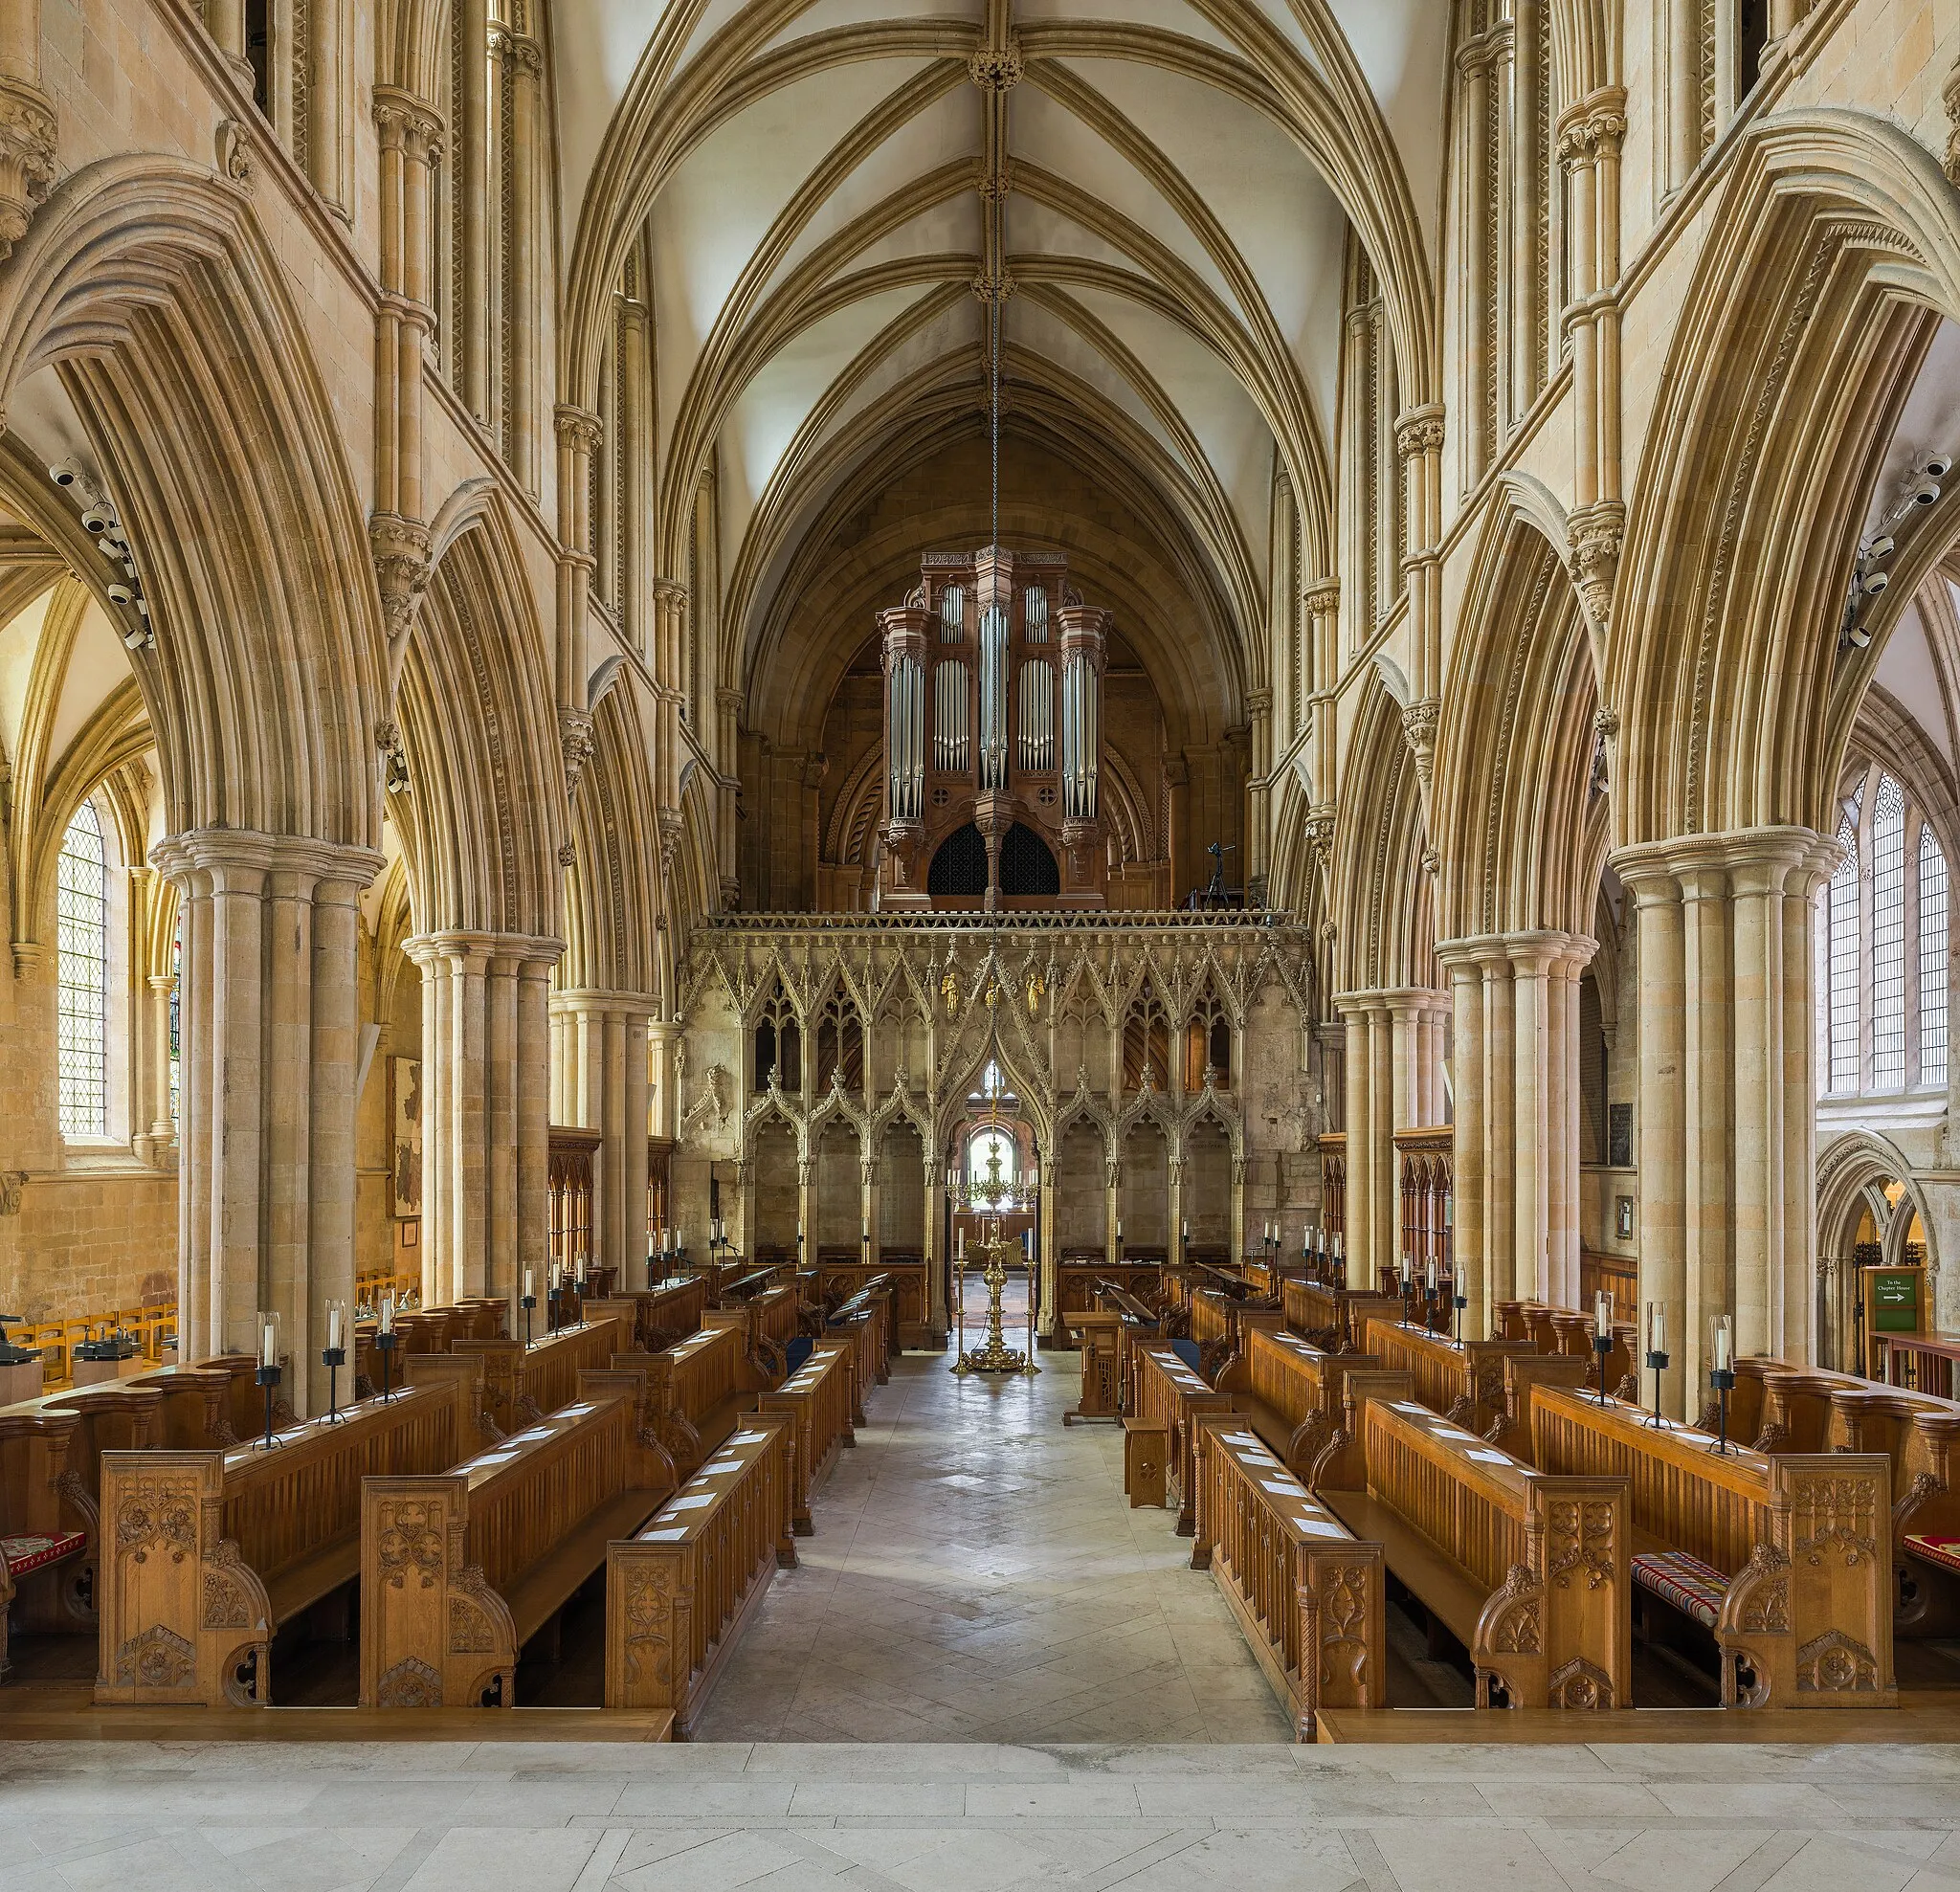 Photo showing: The organ and rood screen of Southwell Minster viewed from the sanctuary, in Nottinghamshire, England.